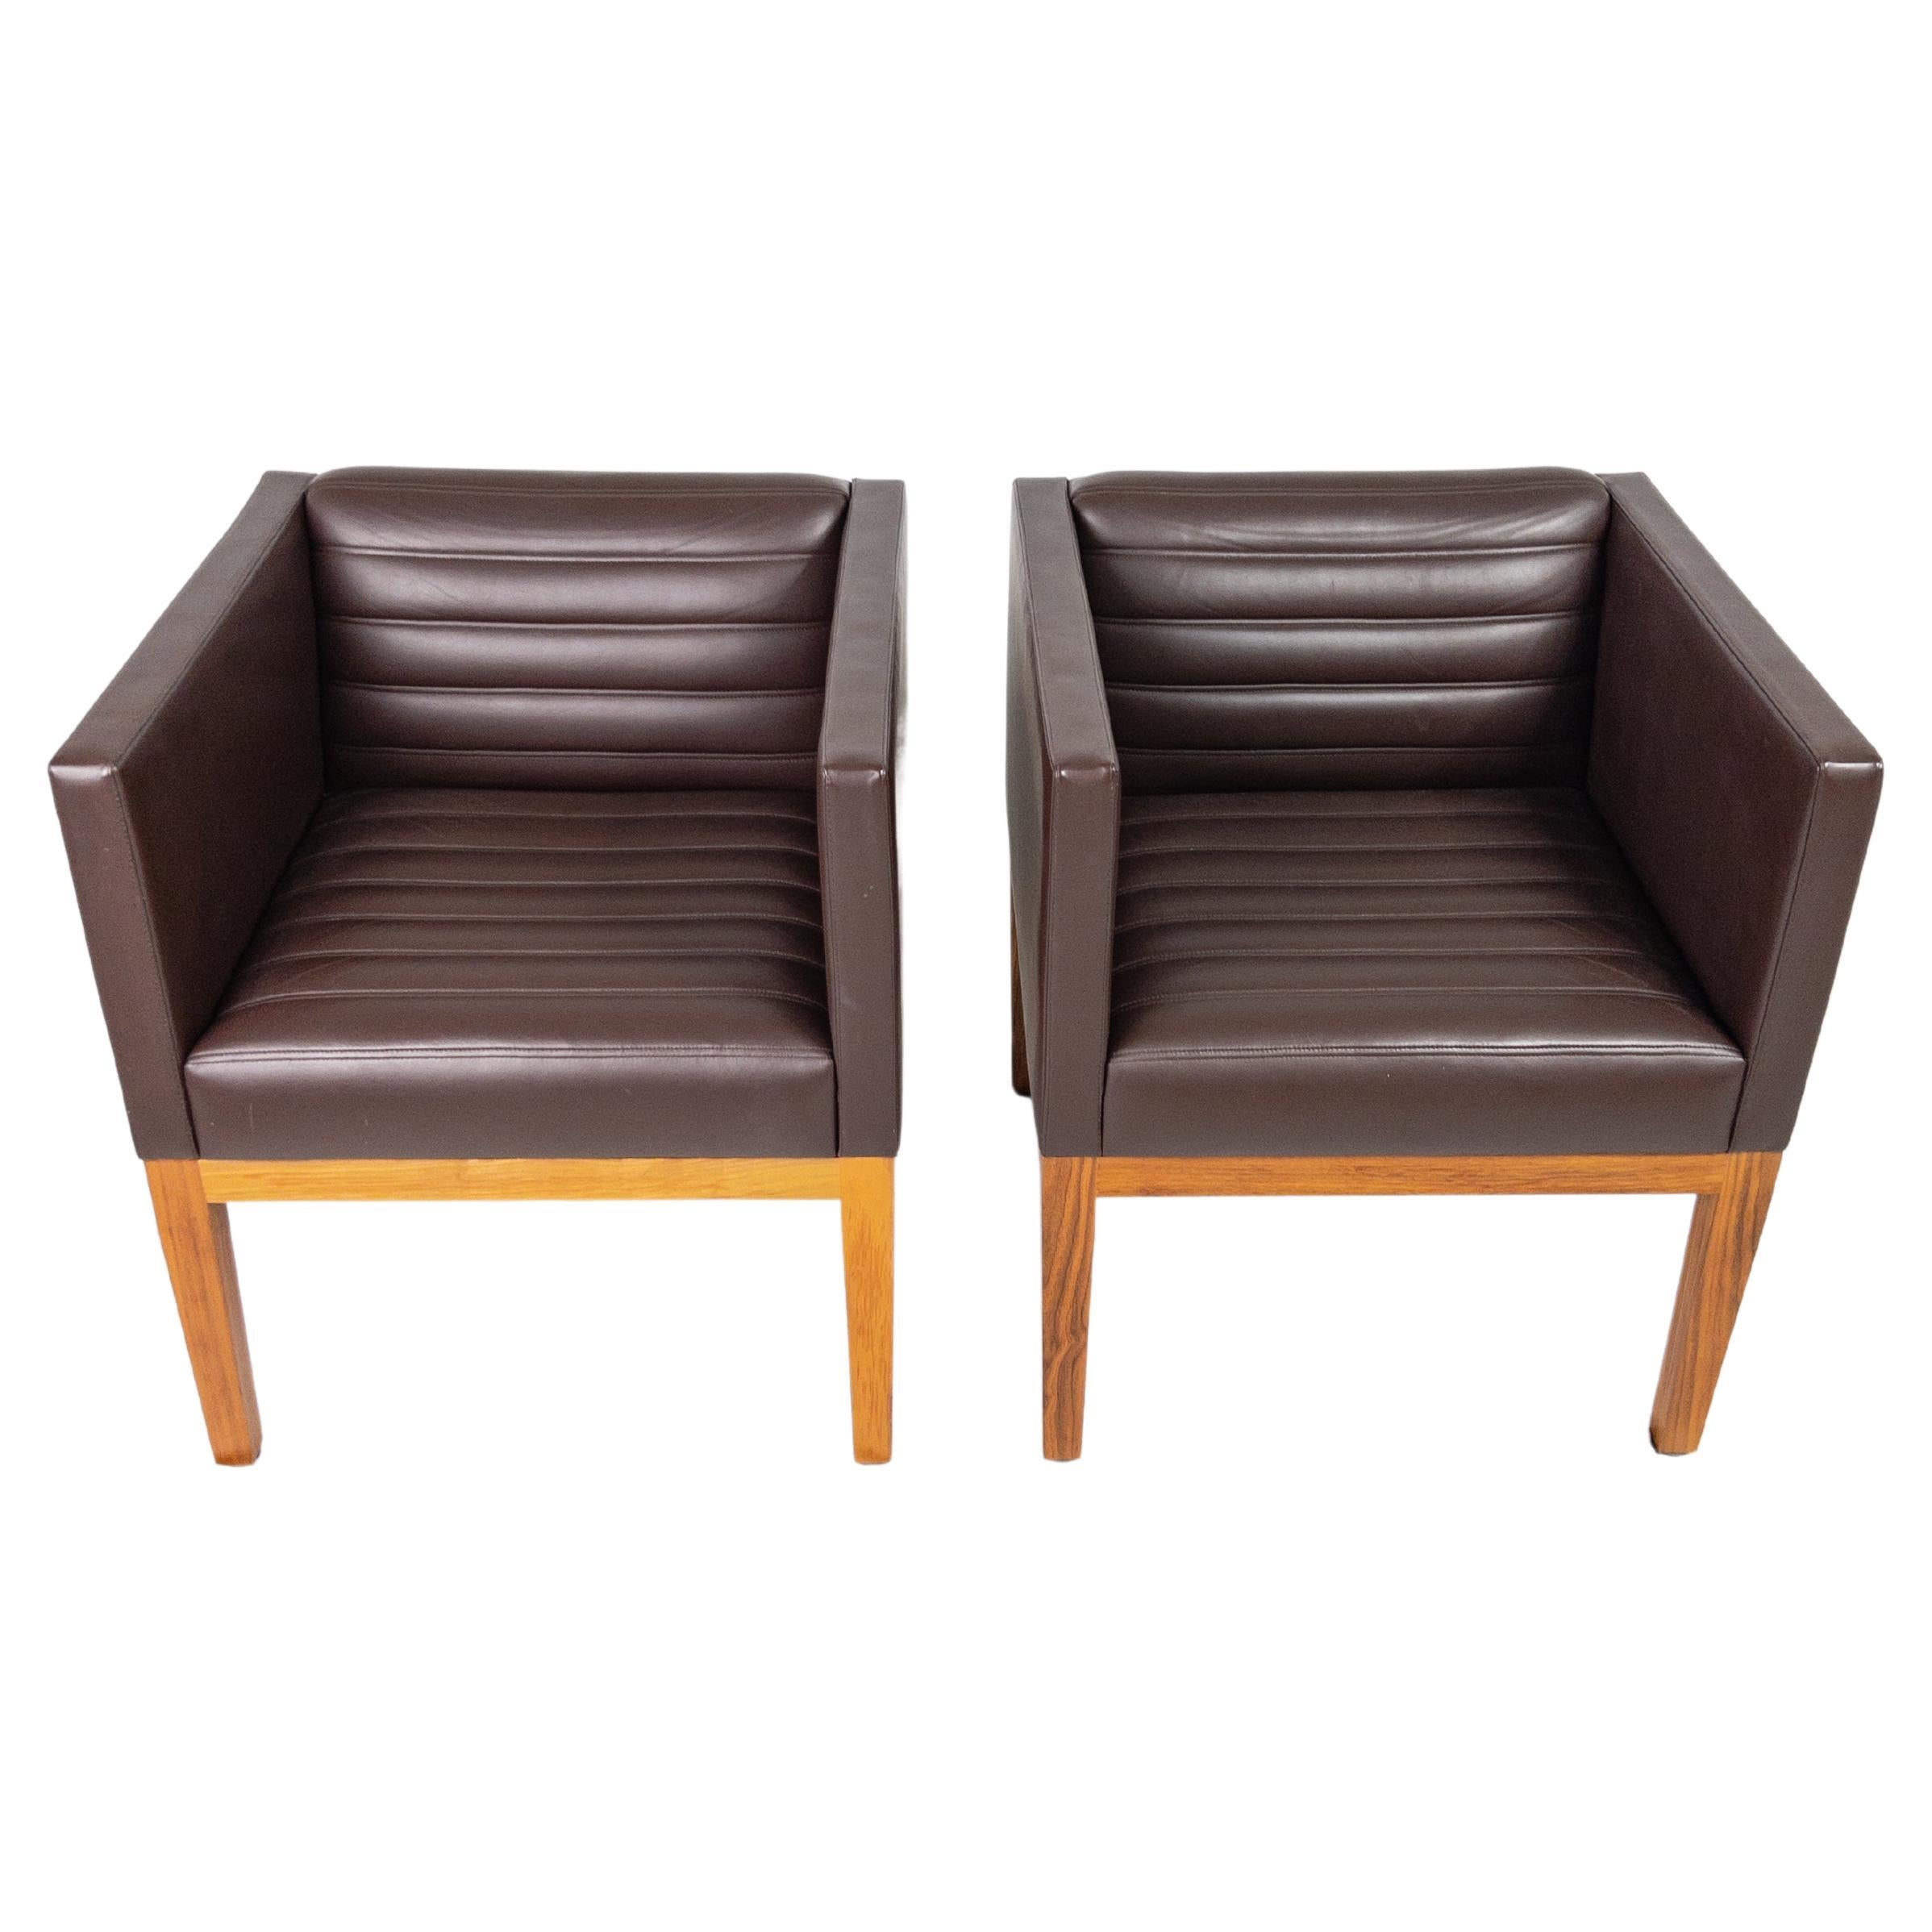 Fabulous Pair of Mid Century Leather Arm Chairs by LINLEY London For Sale